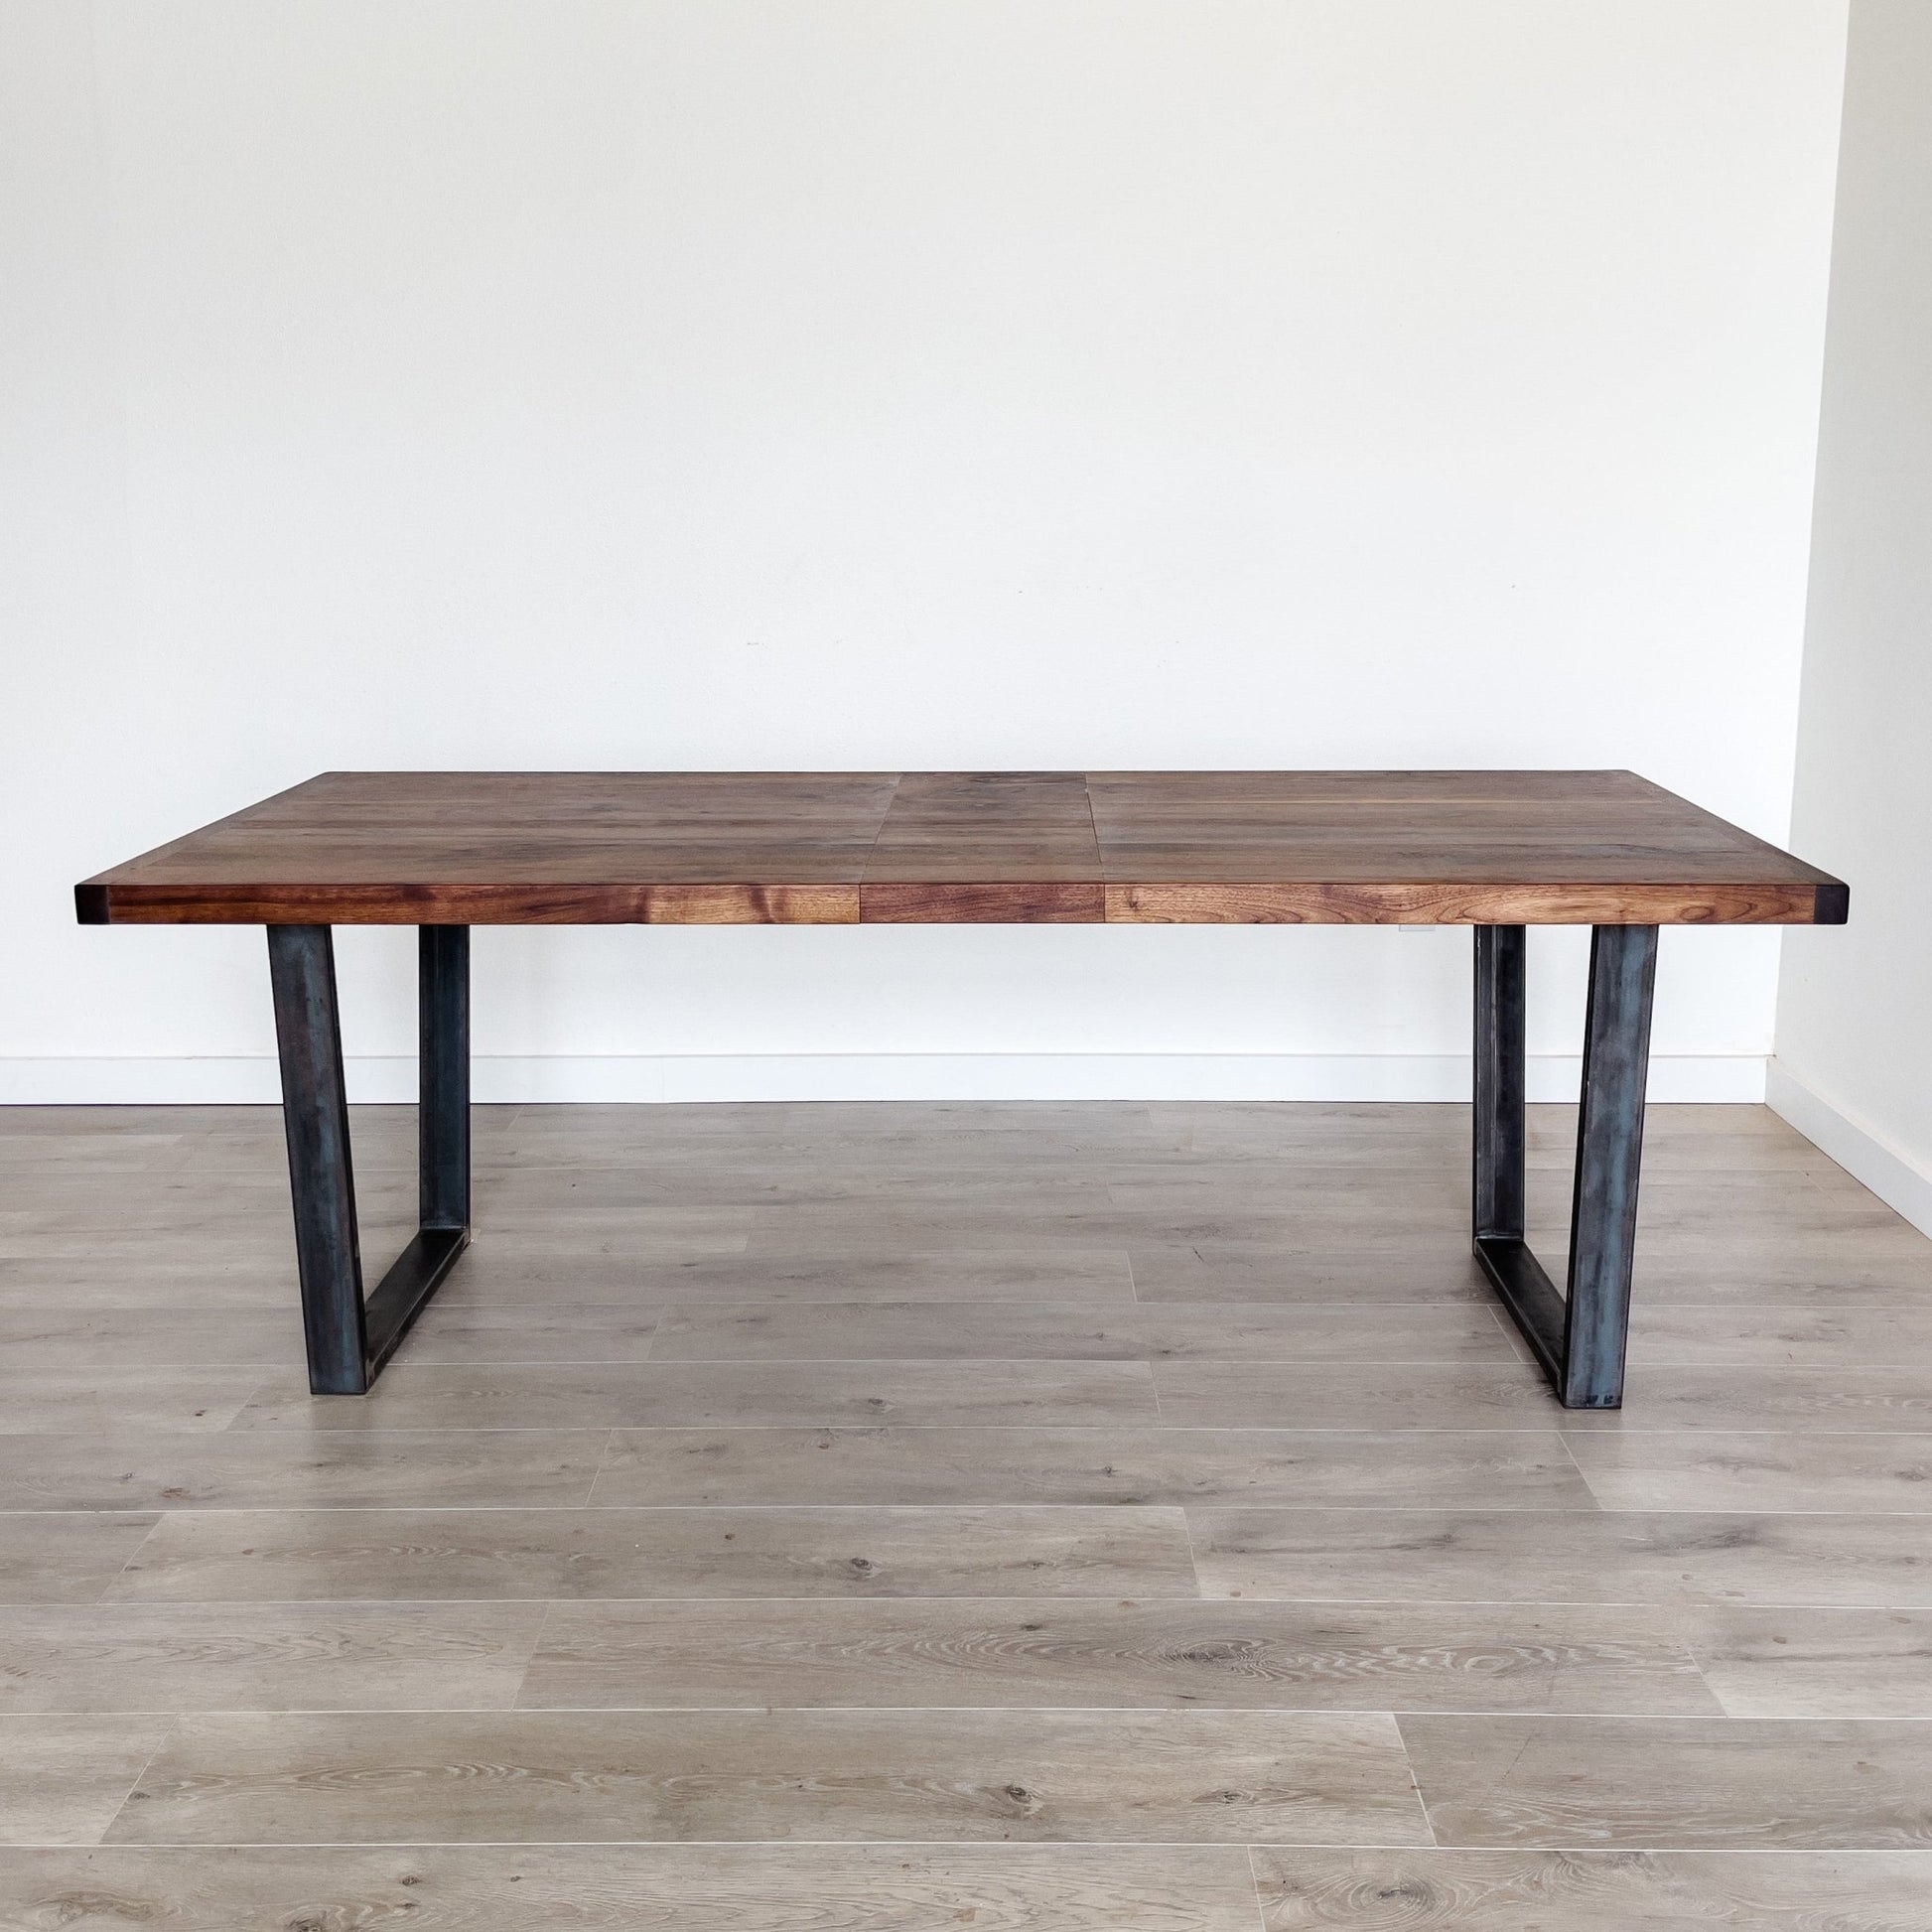 The Modern Extension Table - FargoWoodworks